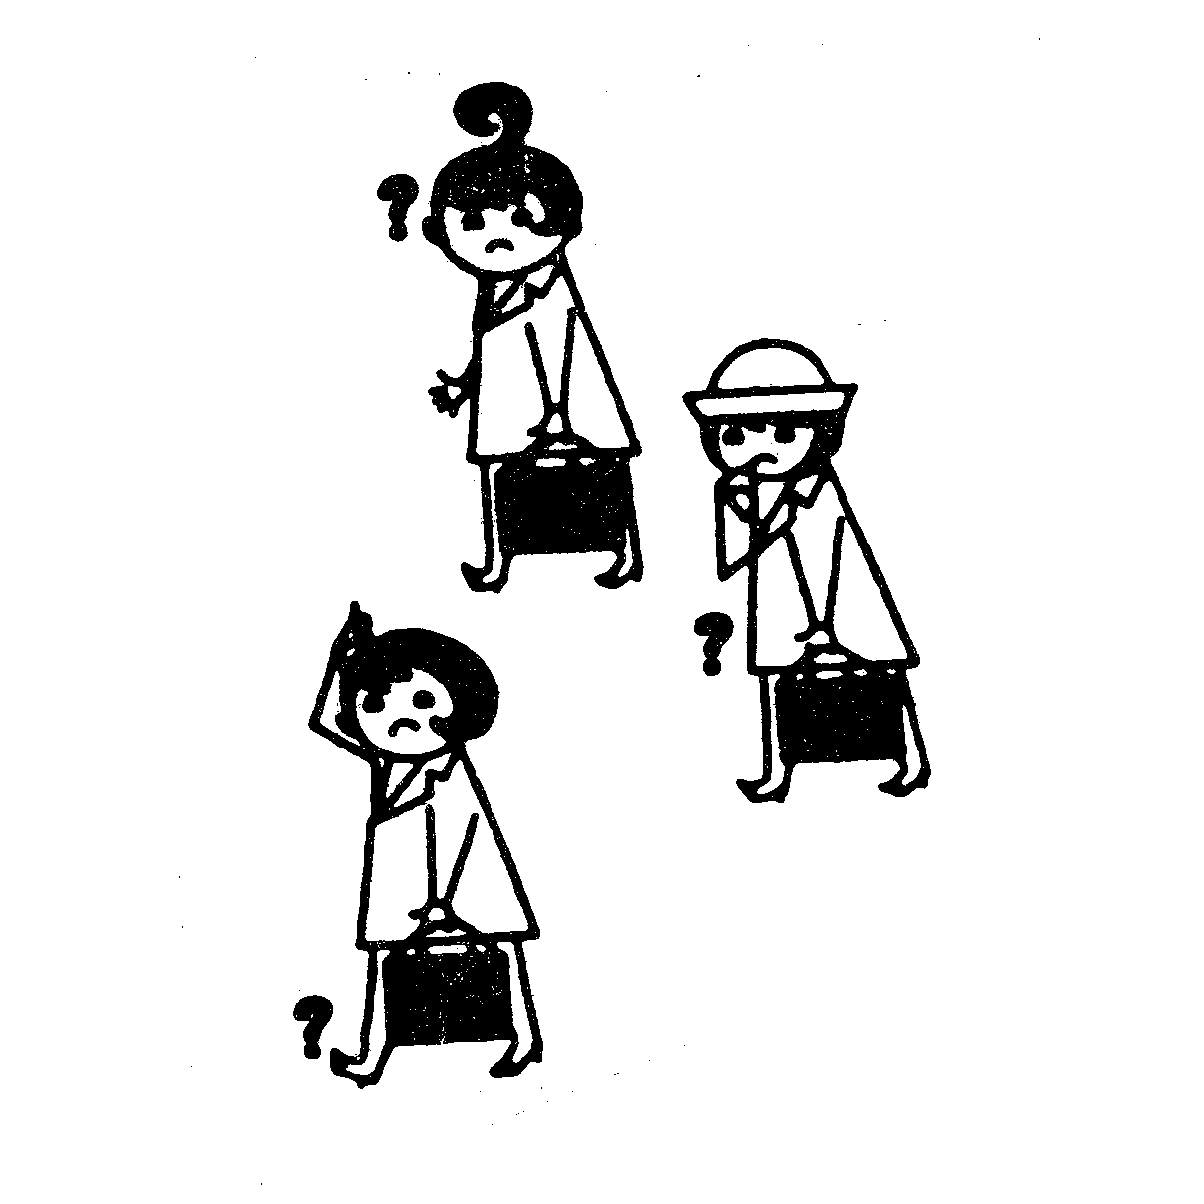 Found imagery - Black & white line drawing of a group of three unsure looking women holding bags with question marks next to each of the three women 